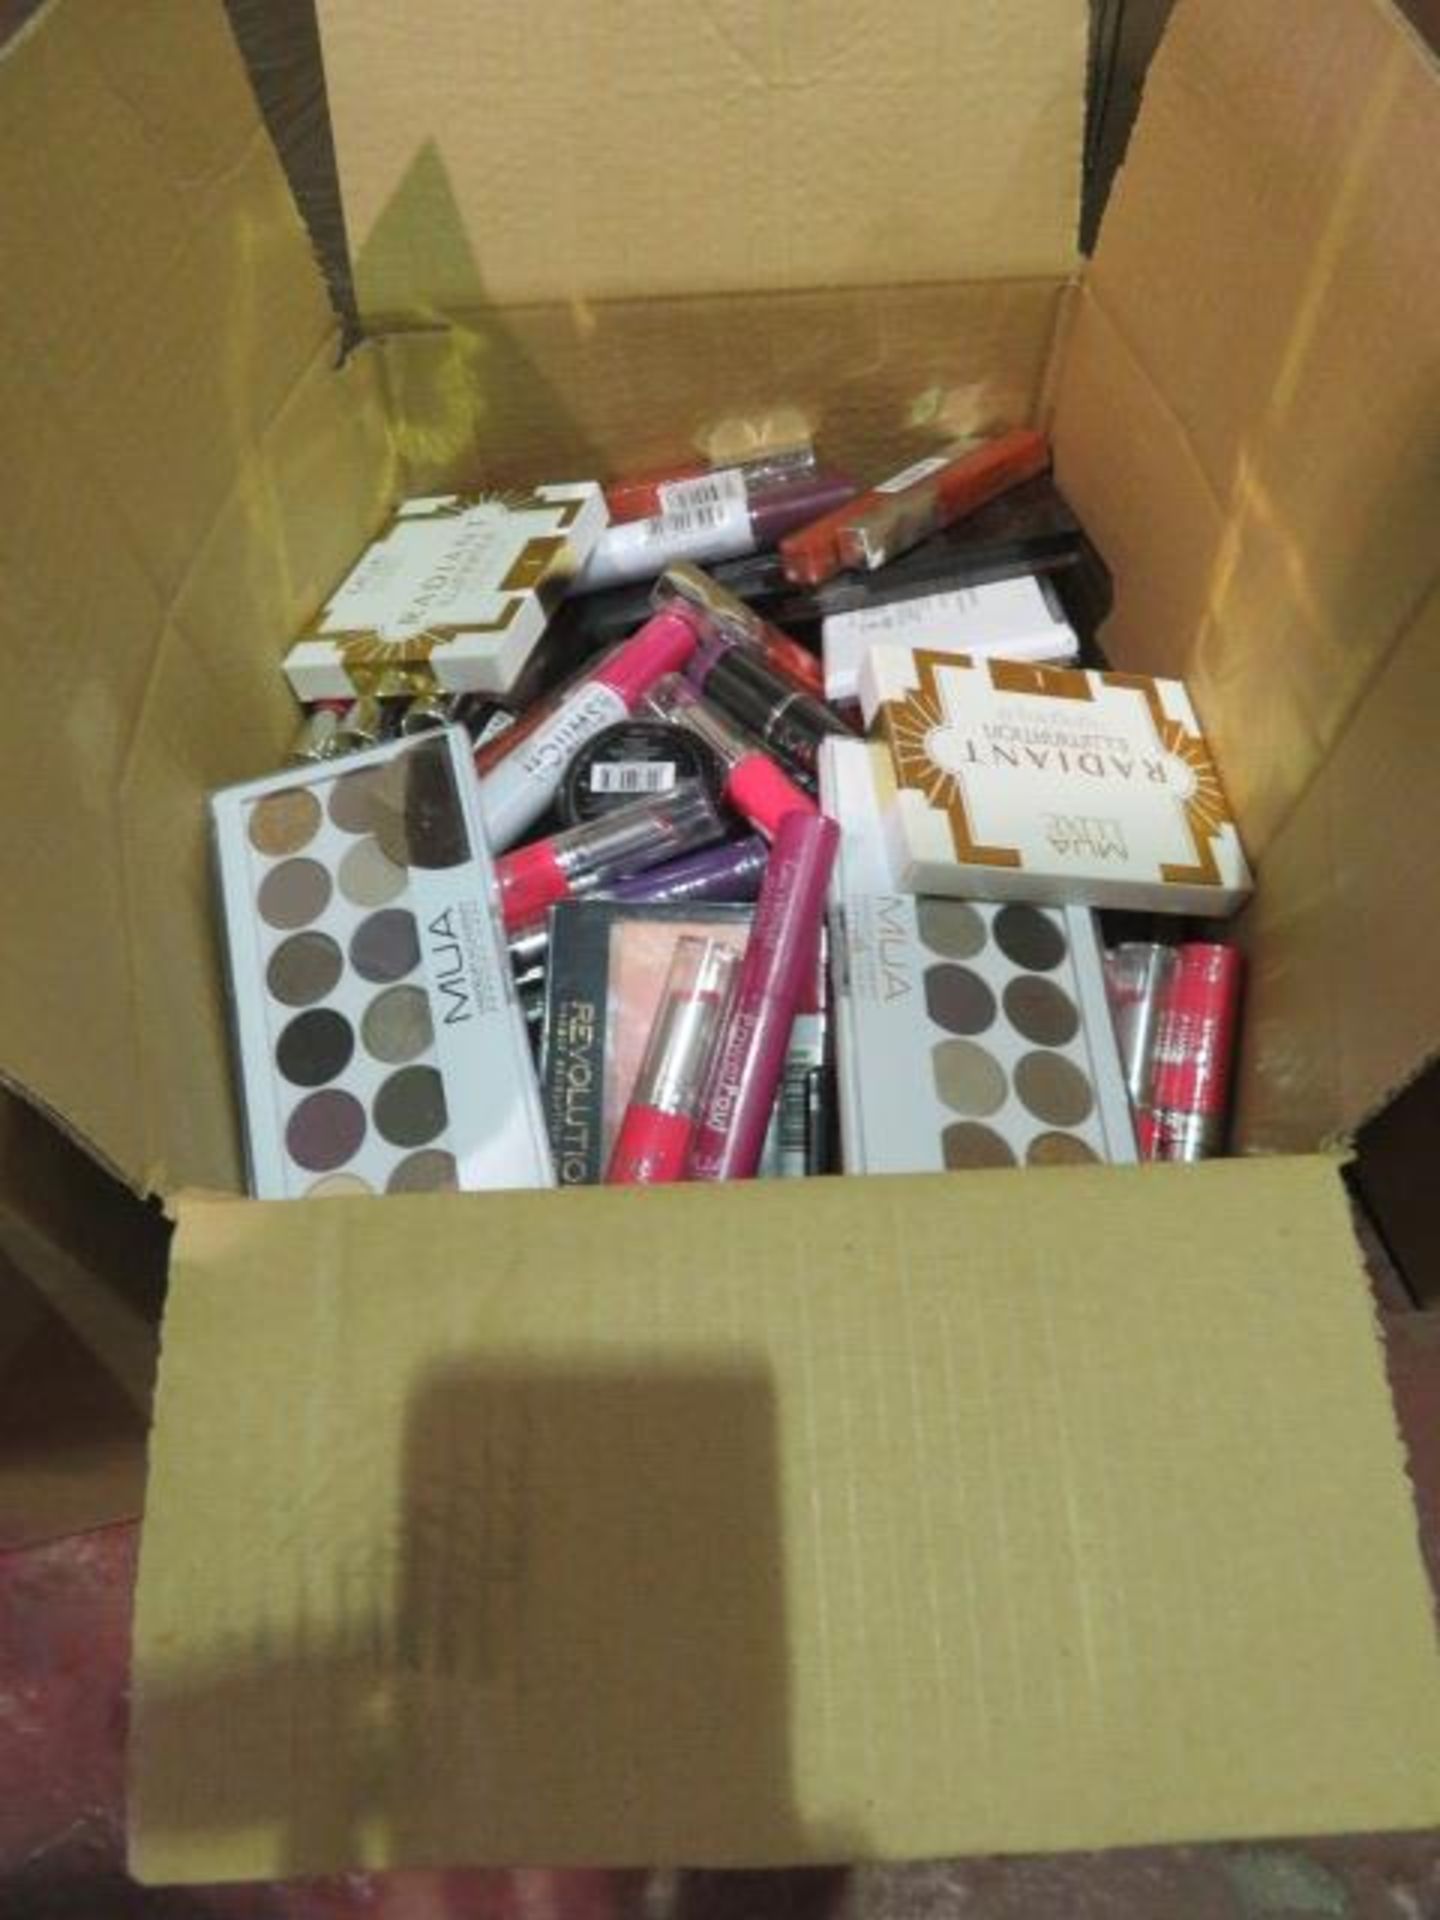 Circa. 200 items of various new make up acadamy make up to include: revolution eye shadow palette, - Image 2 of 2